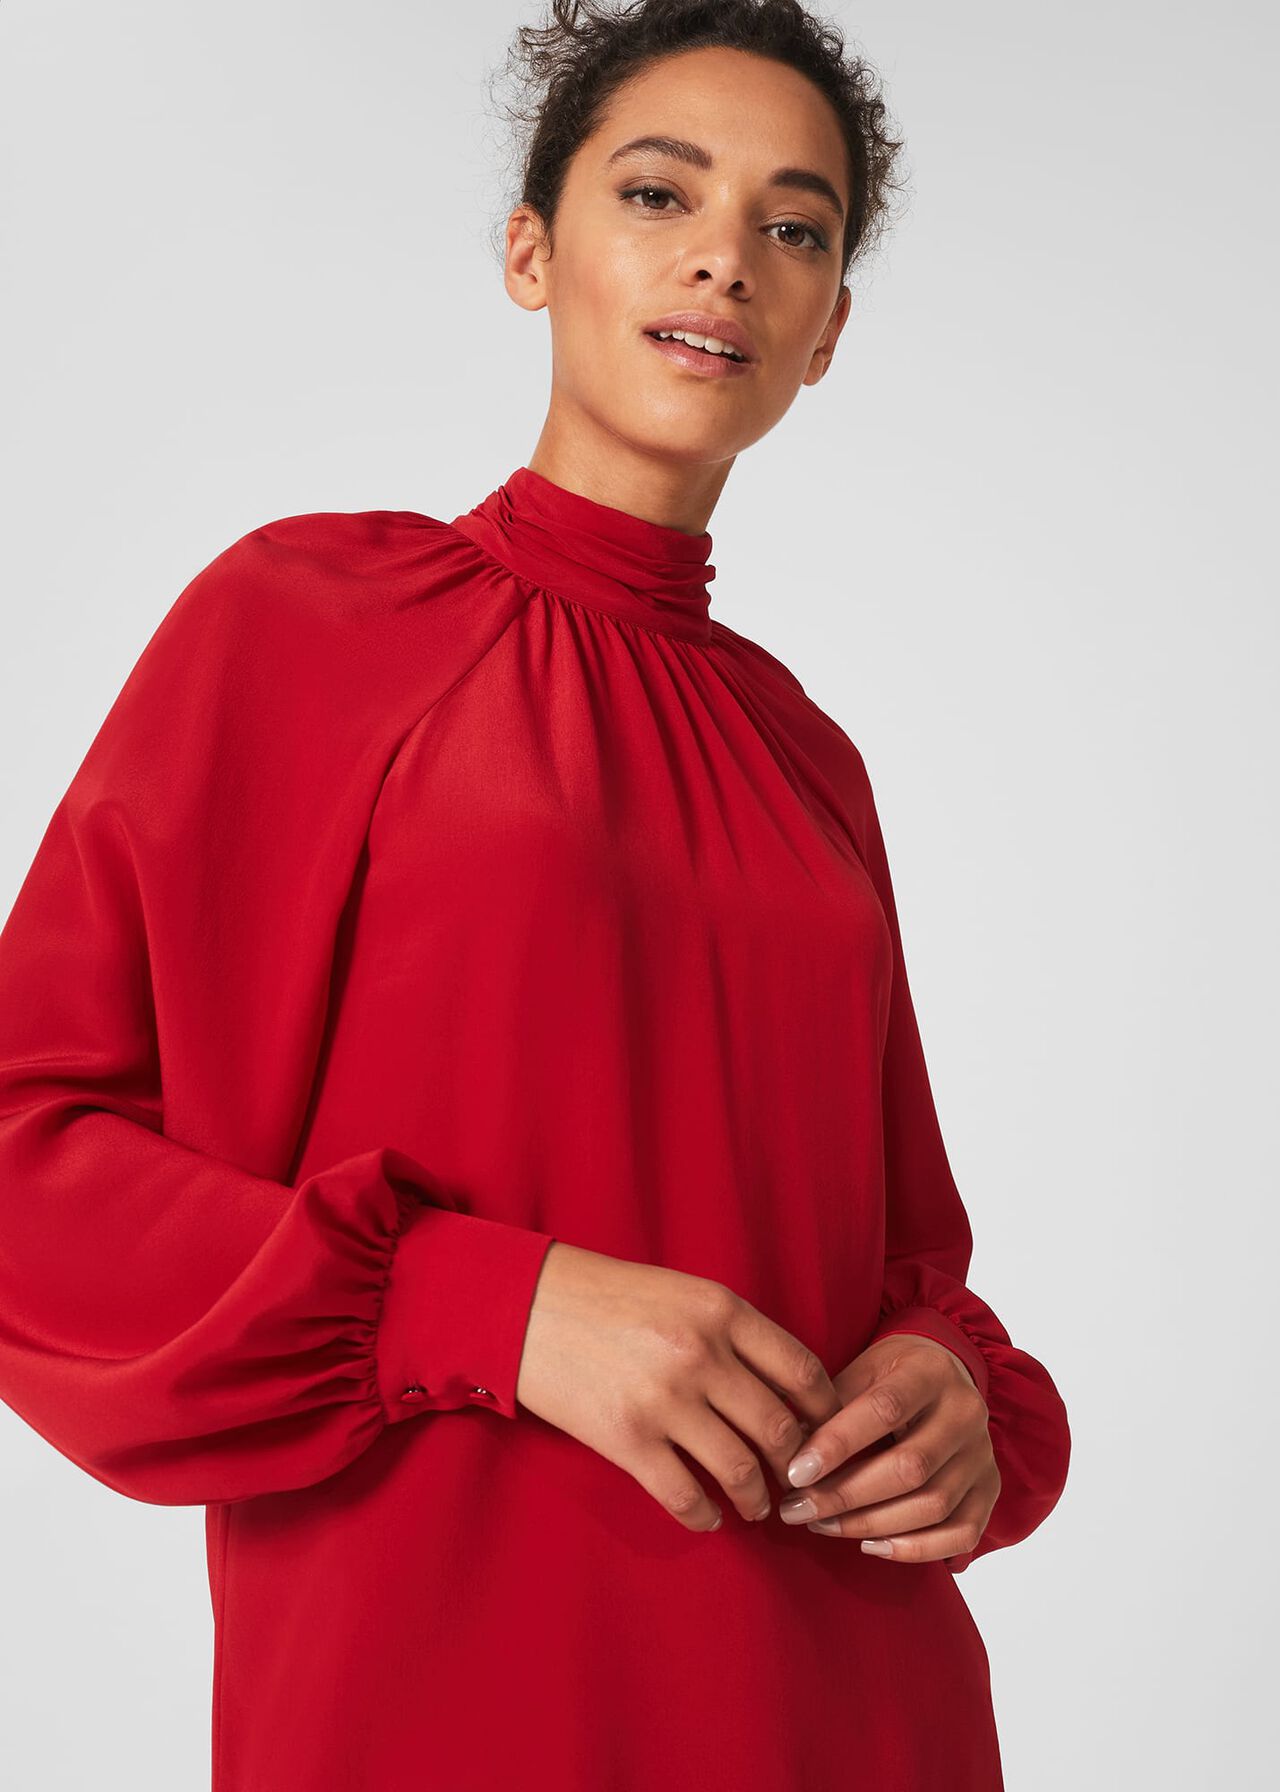 Mollie Silk Blouse, Red, hi-res